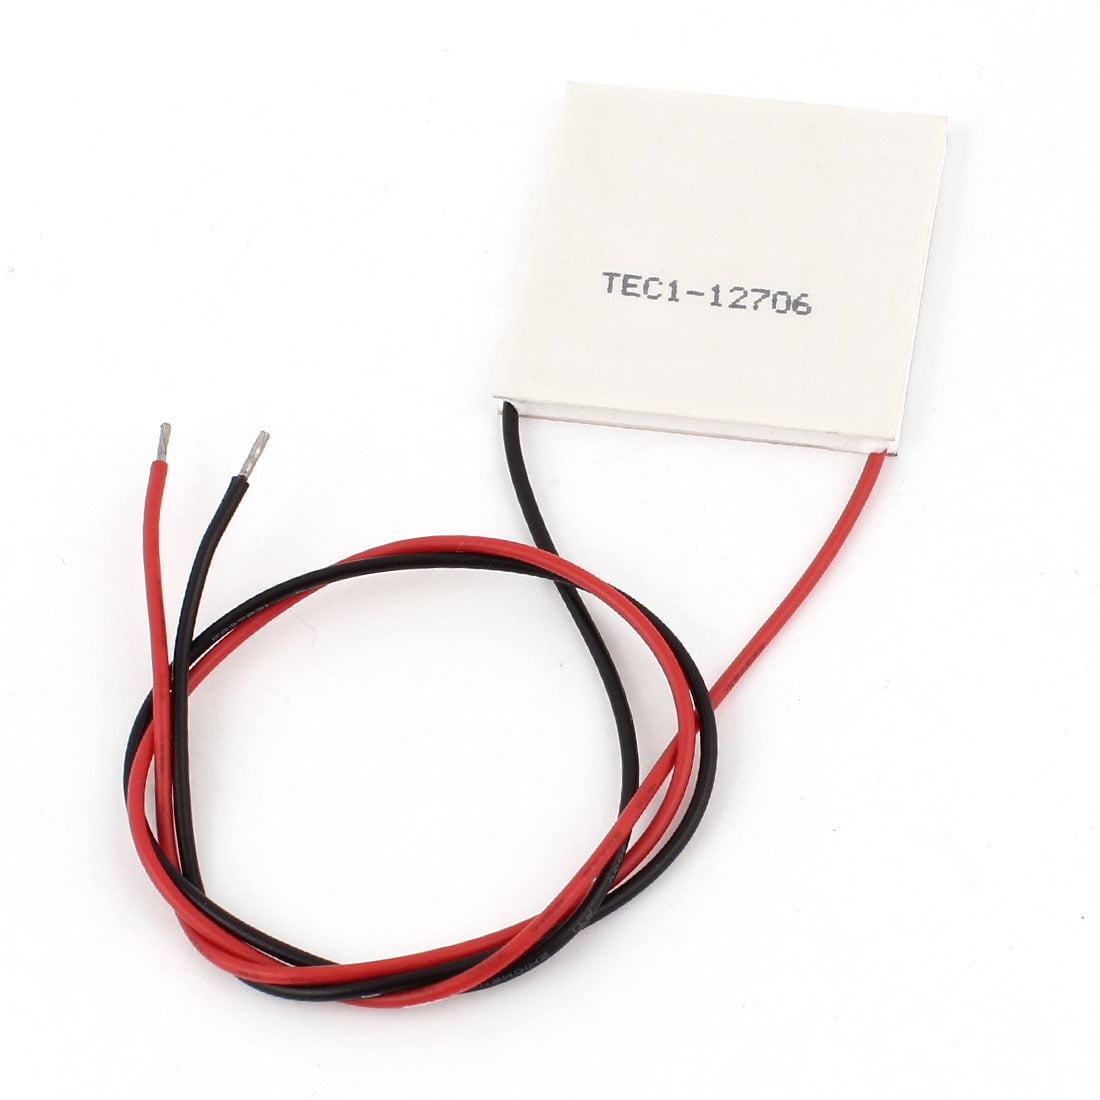 TES1-12704 2A 12V 24W 30x30x3.5mm Thermoelectric Cooler Peltier Plate Module 